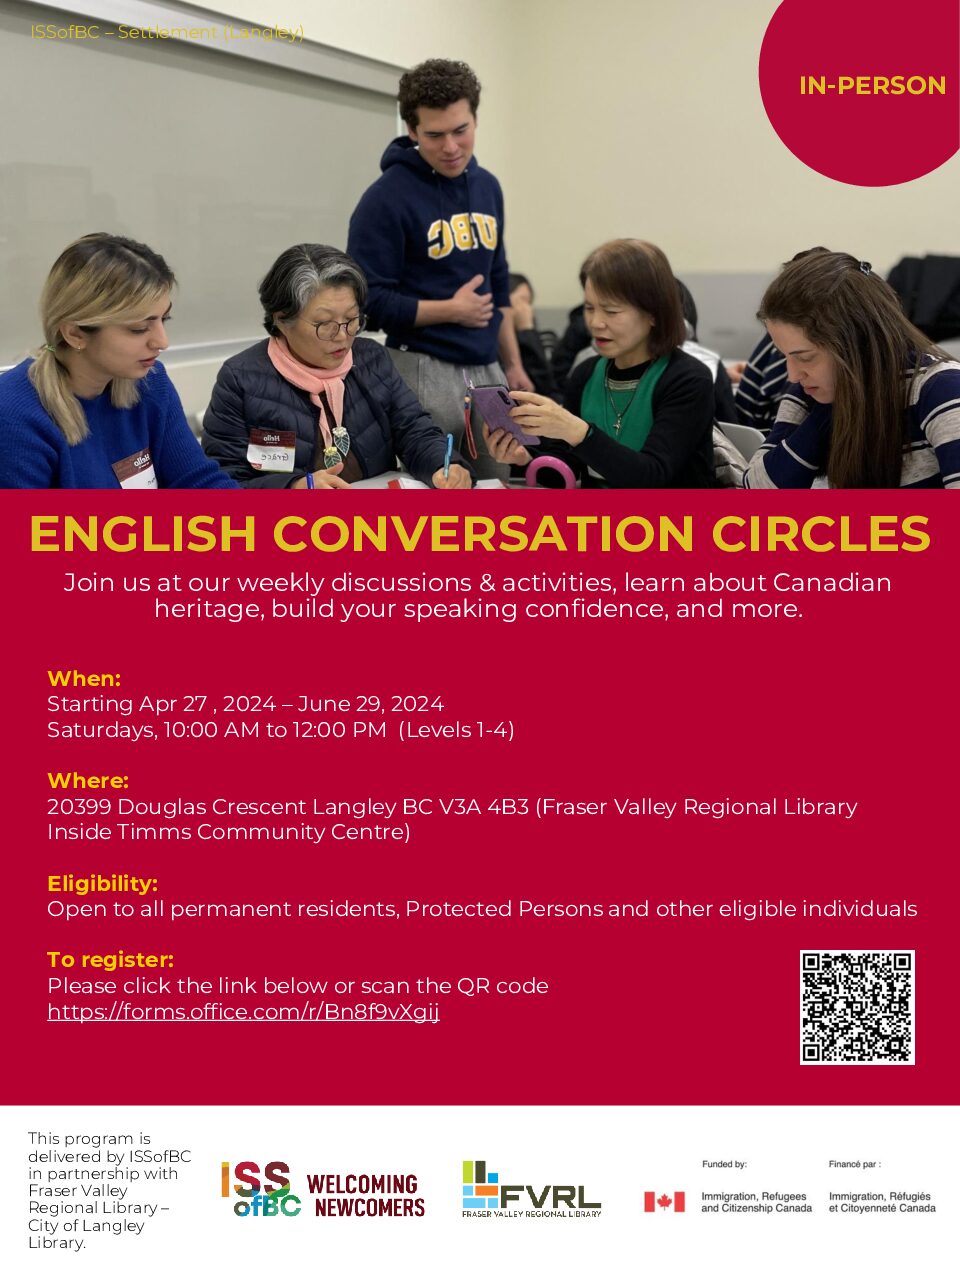 ENGLISH CONVERSATION CIRCLES (IN-PERSON)